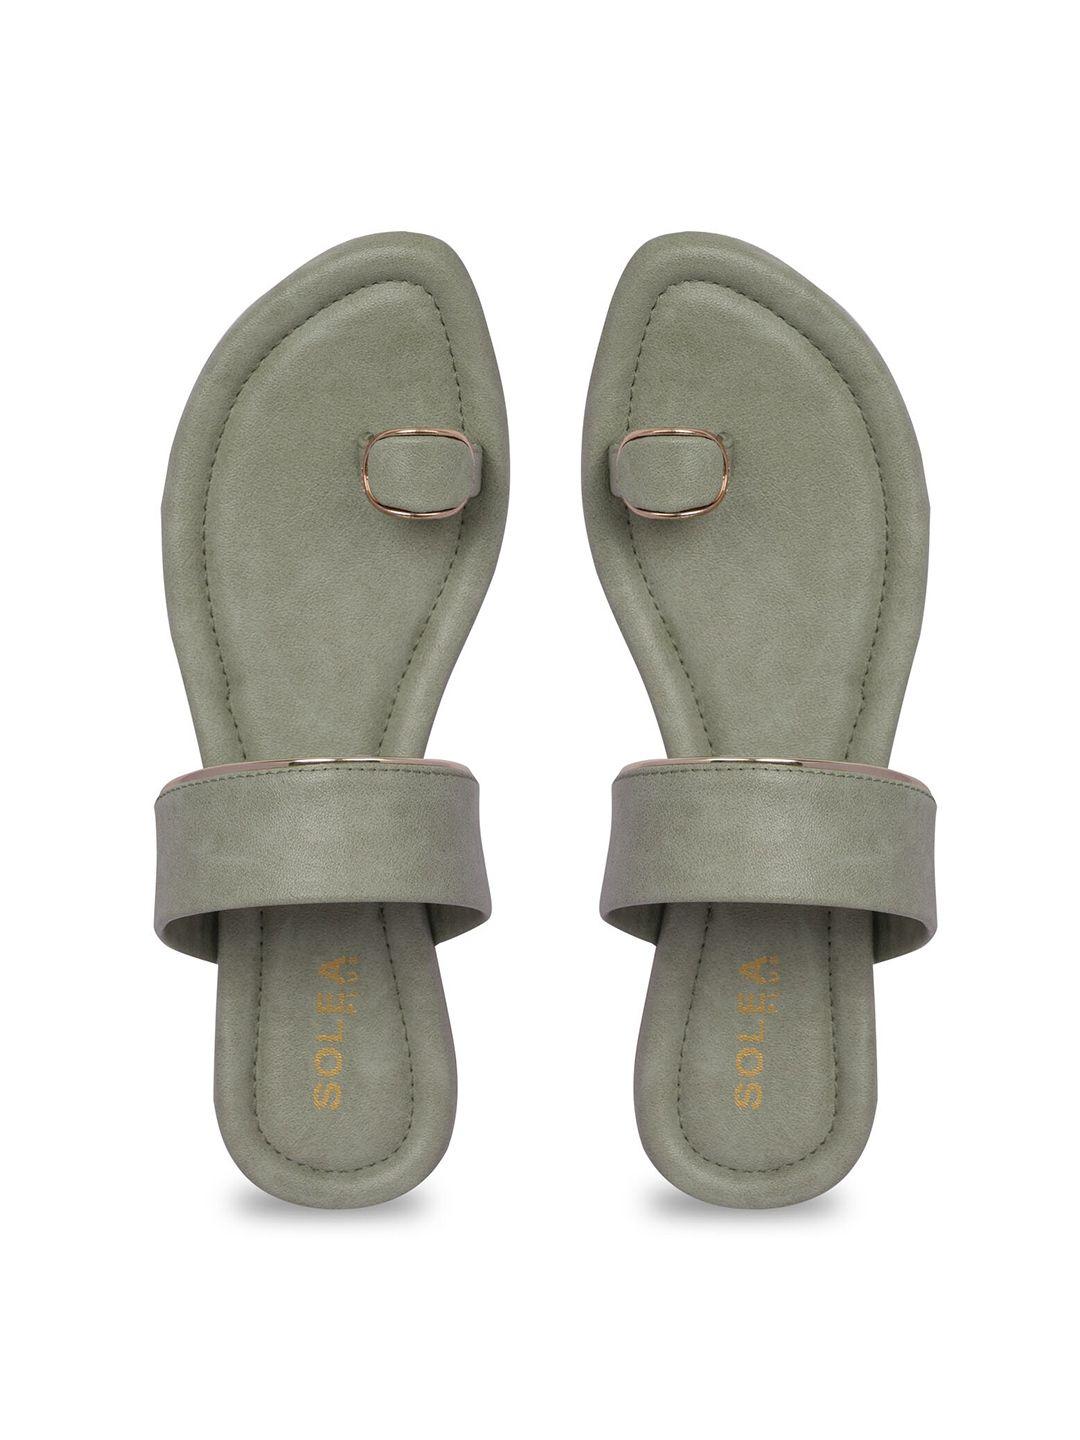 paragon lightweight and ultra comfortable one toe flats